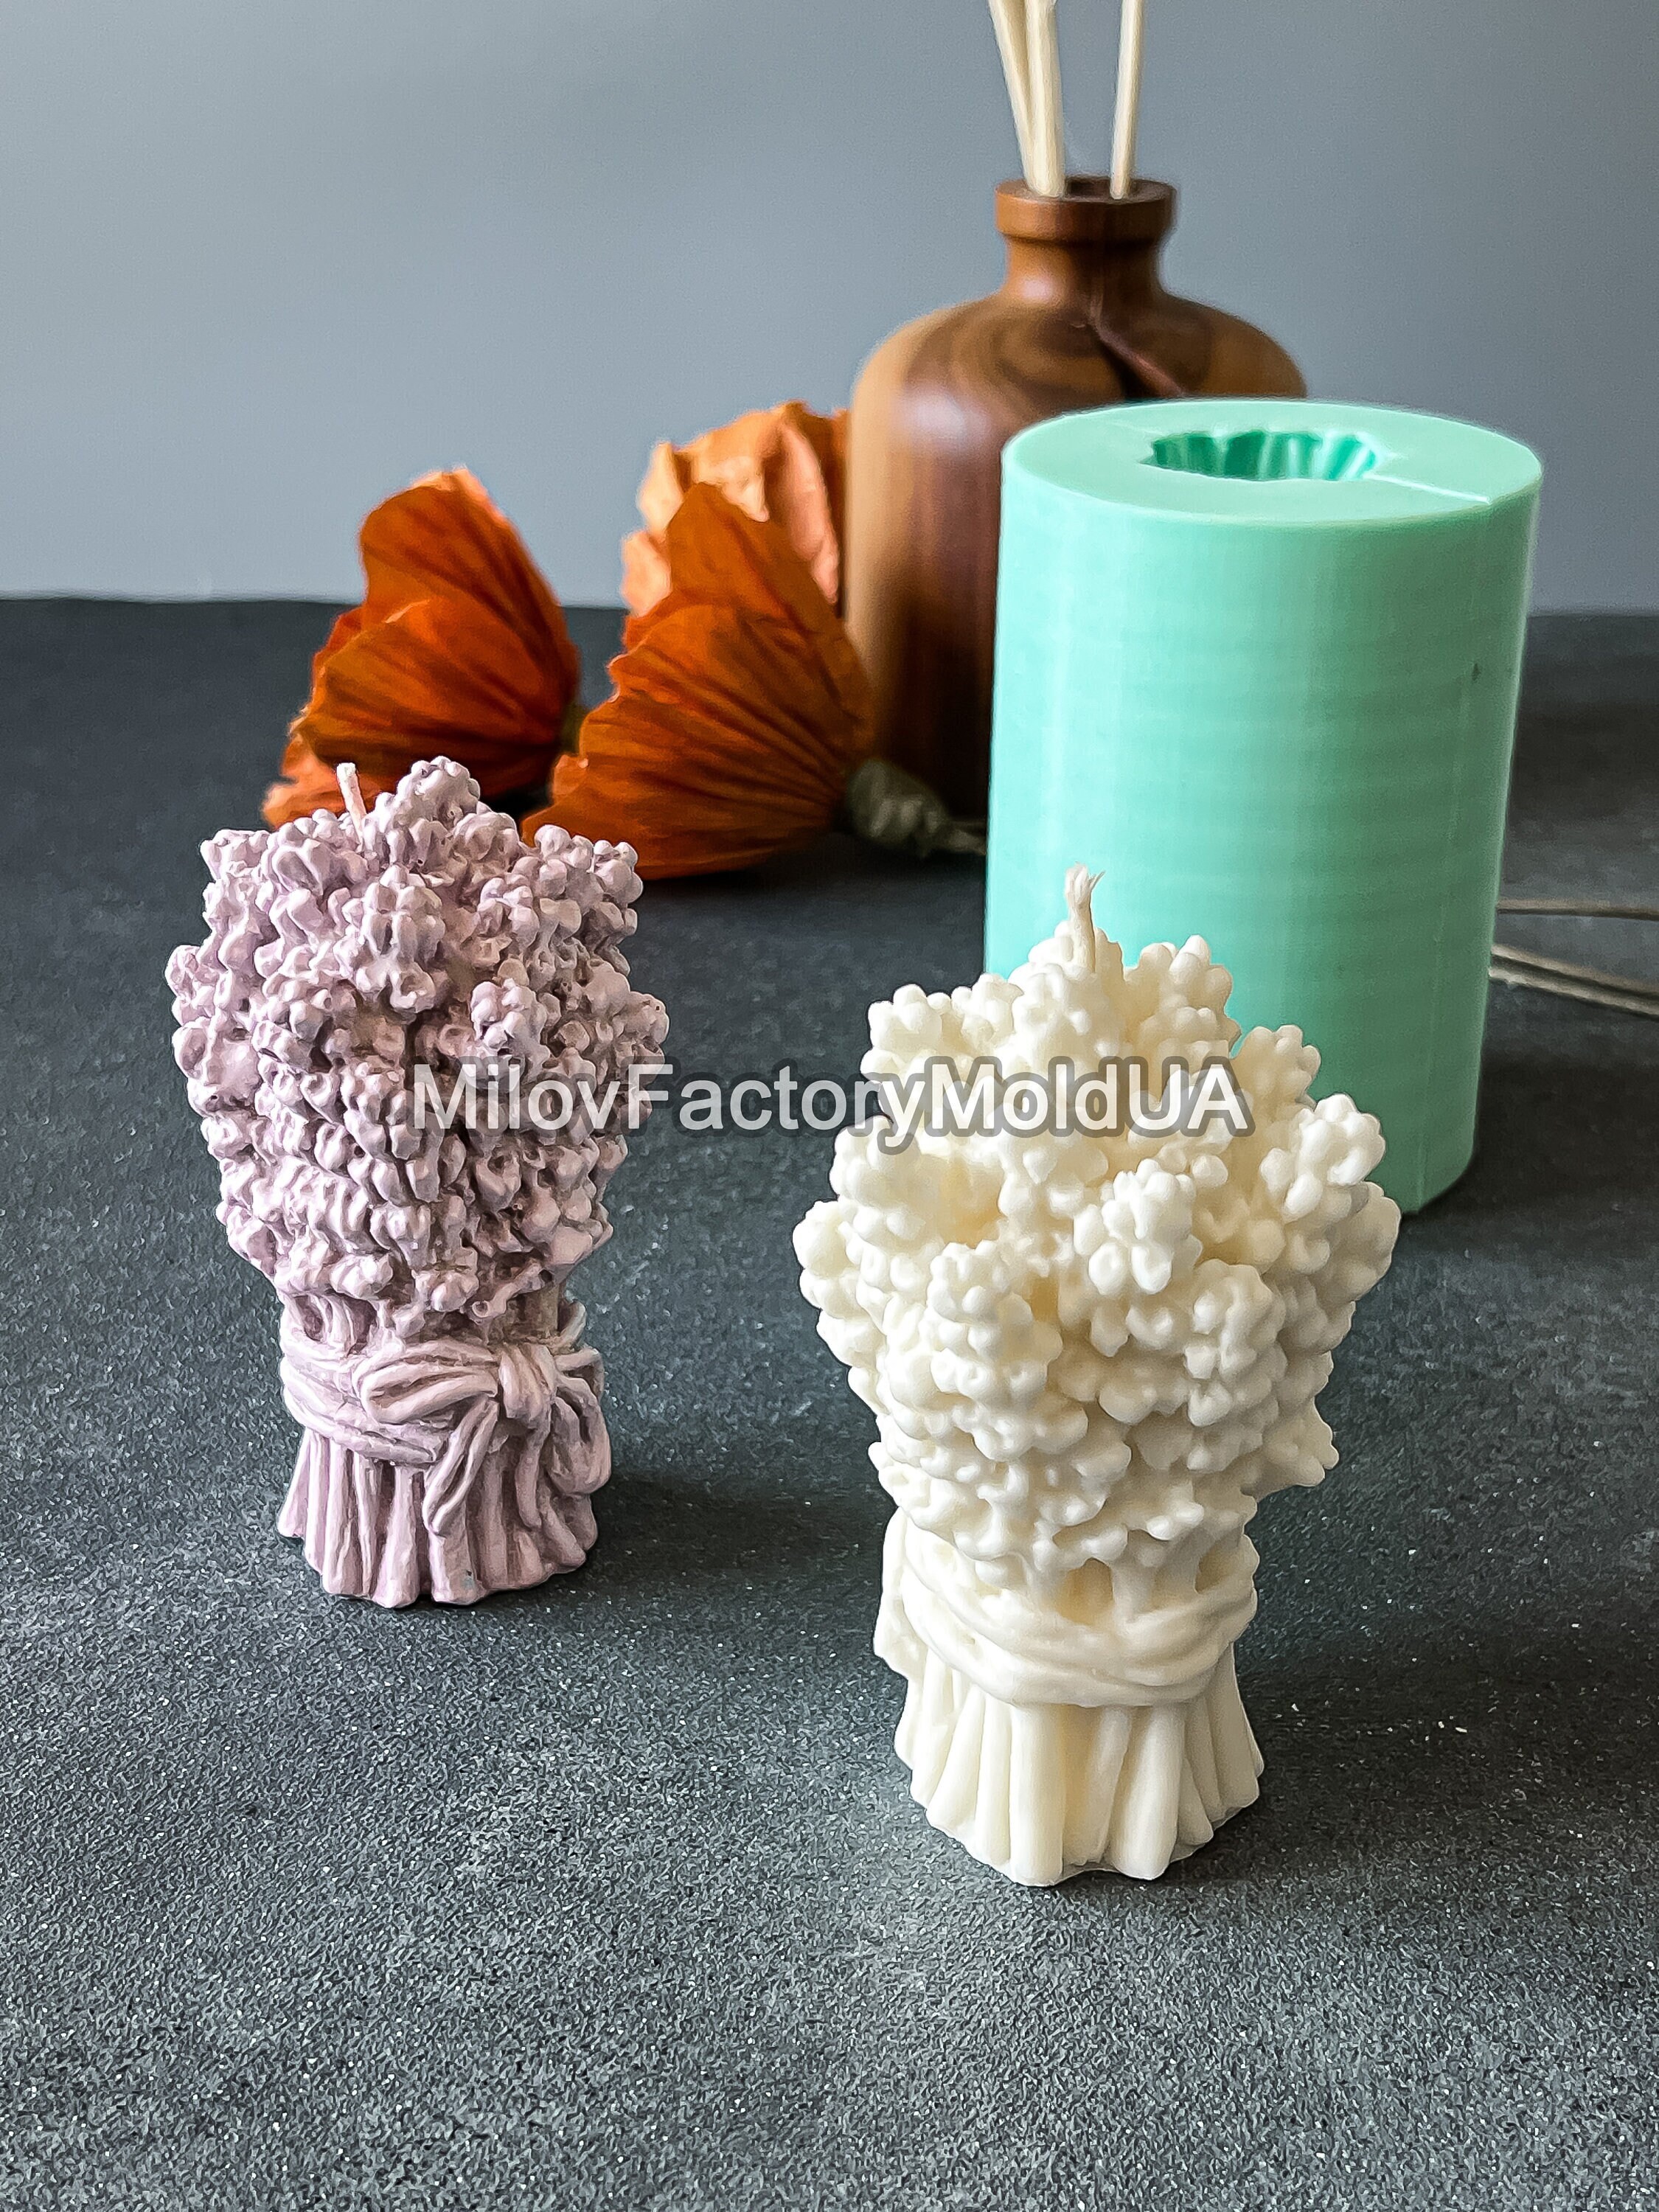 Silicone Mold Rose Flower used with Resin Clay Hot Glue Metal